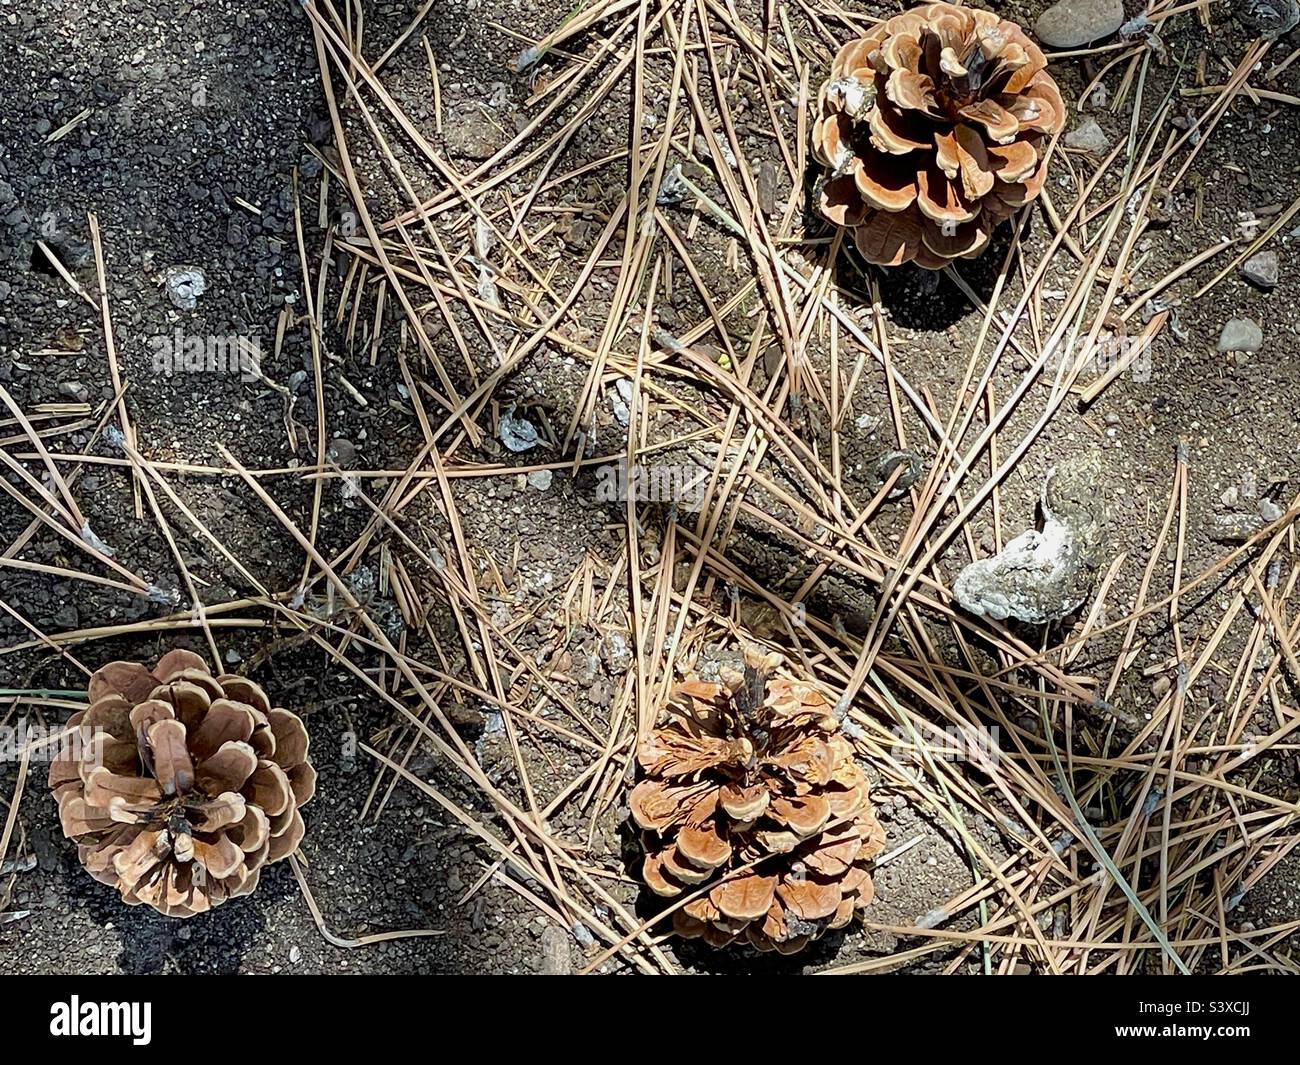 The grounds at a local church in Utah, USA on a spring day, below the pines, many pine needles and pine cones can be seen strewn about, scattered amidst the grass and soil. Stock Photo